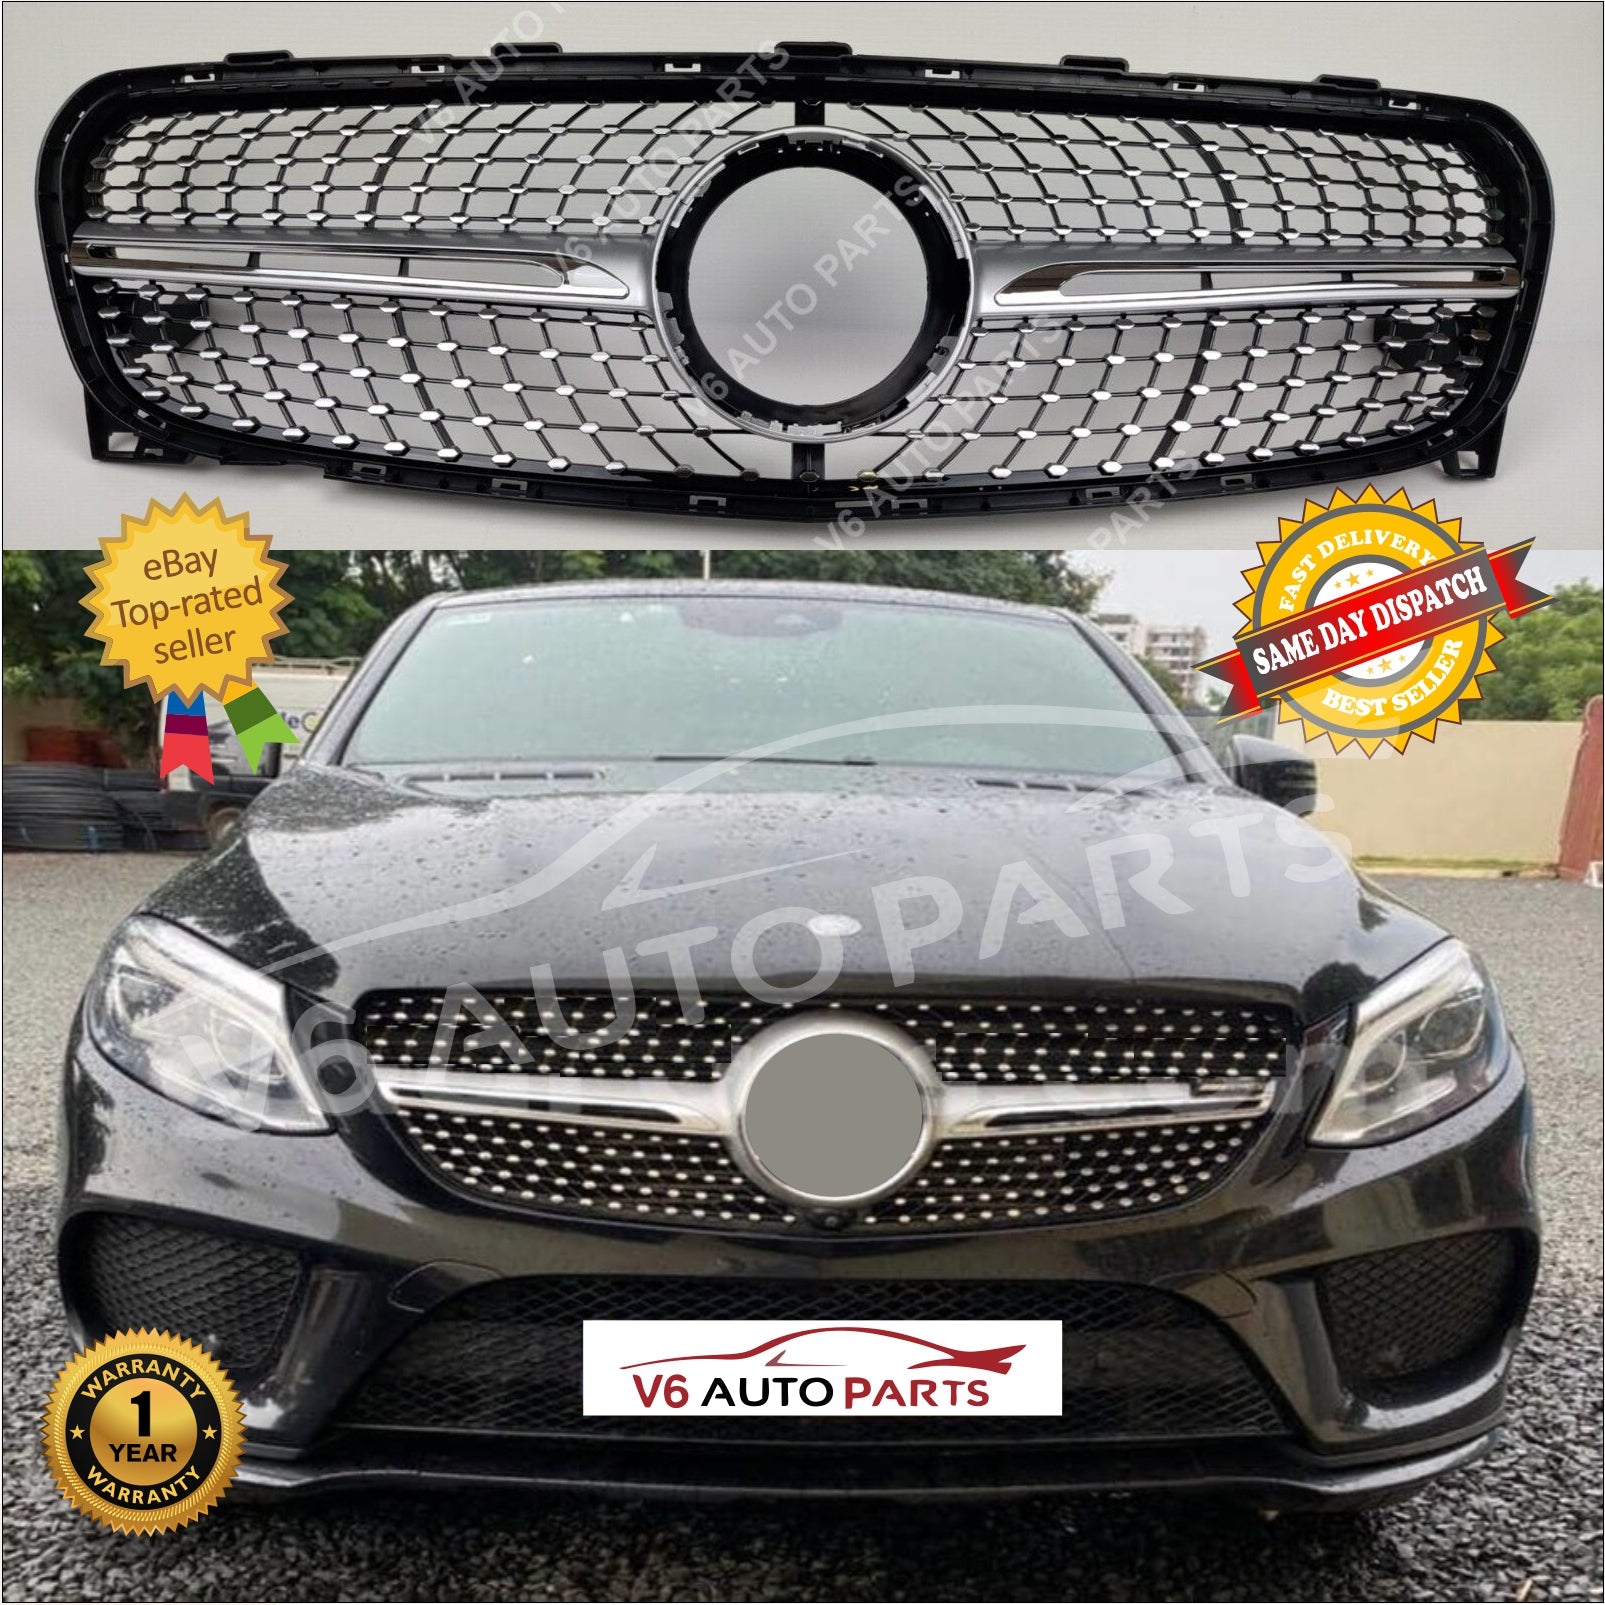 For Mercedes GLA Class X156 GLA250 front Radiator Diamond Grille 2017-19 AMG 45